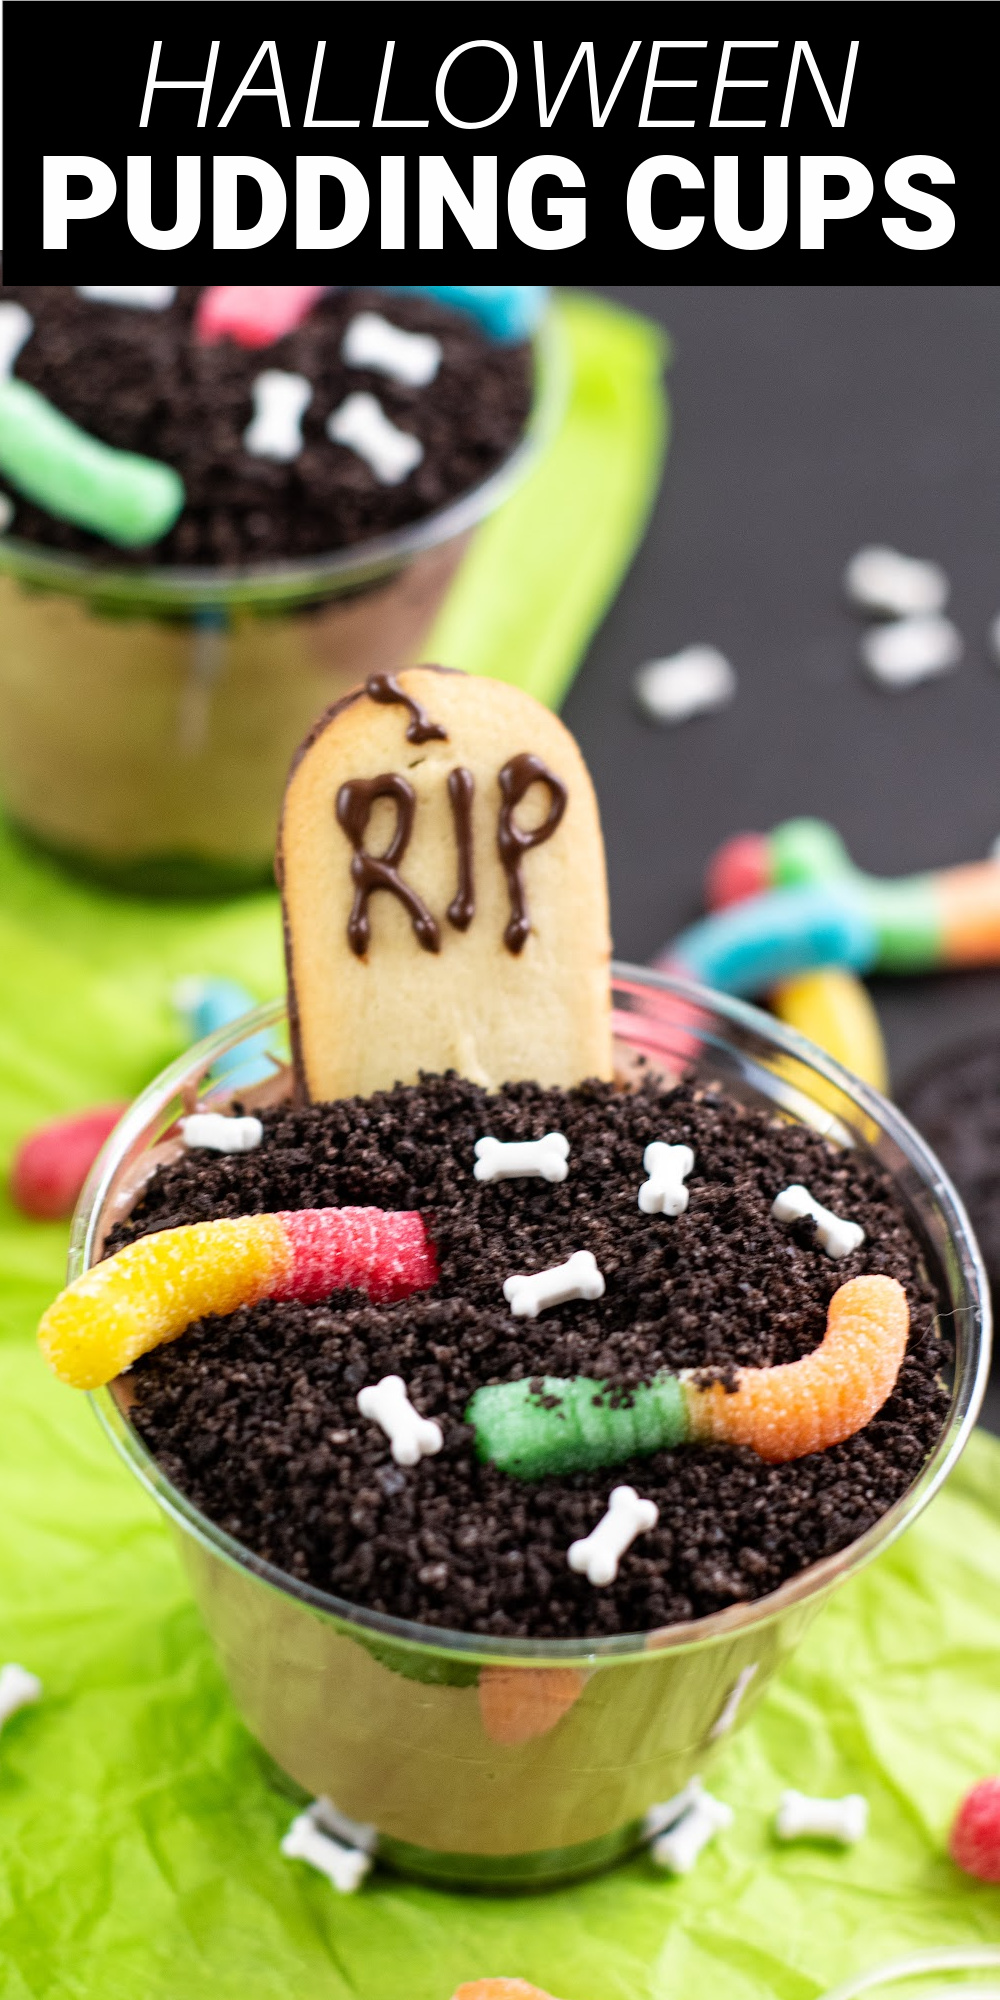 Graveyard Dirt Cups are a fun dessert perfect for a Halloween party or a silly treat at home. These pudding cups are filled with crushed Oreos, chocolate pudding, Cool Whip, and fun treats on top.